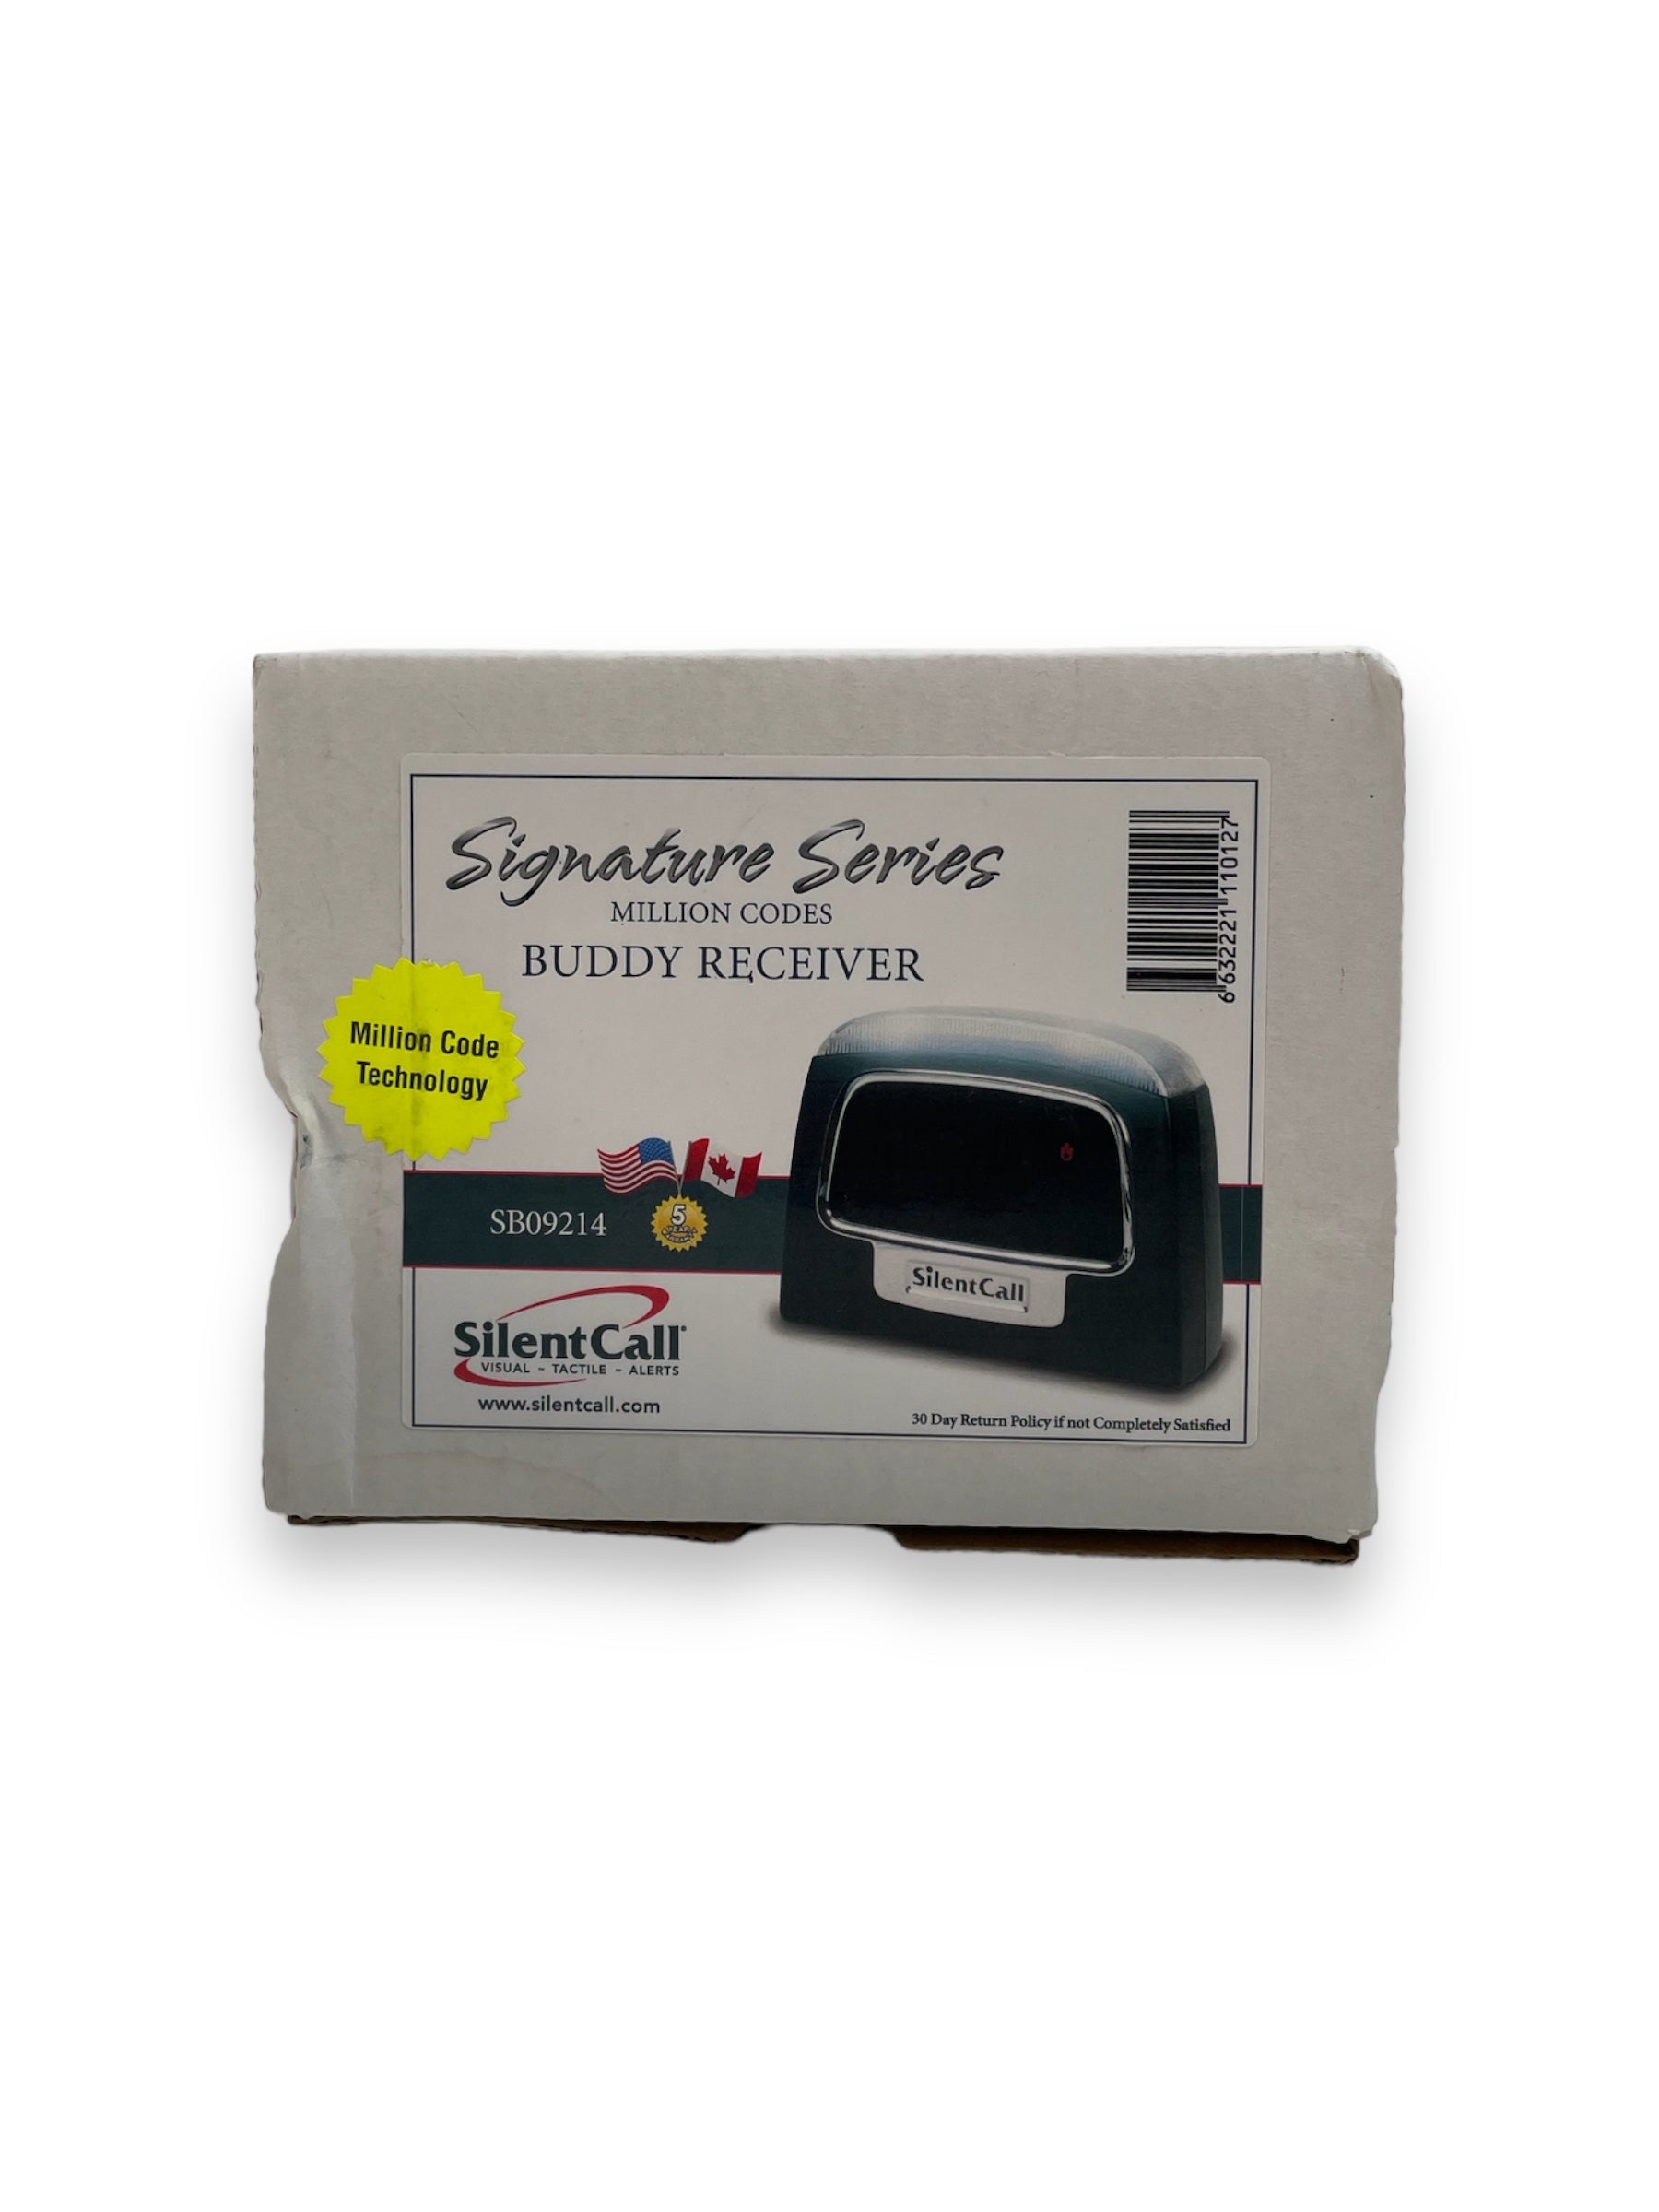 Silent Call Buddy Receiver SB09214 from the Signature Series